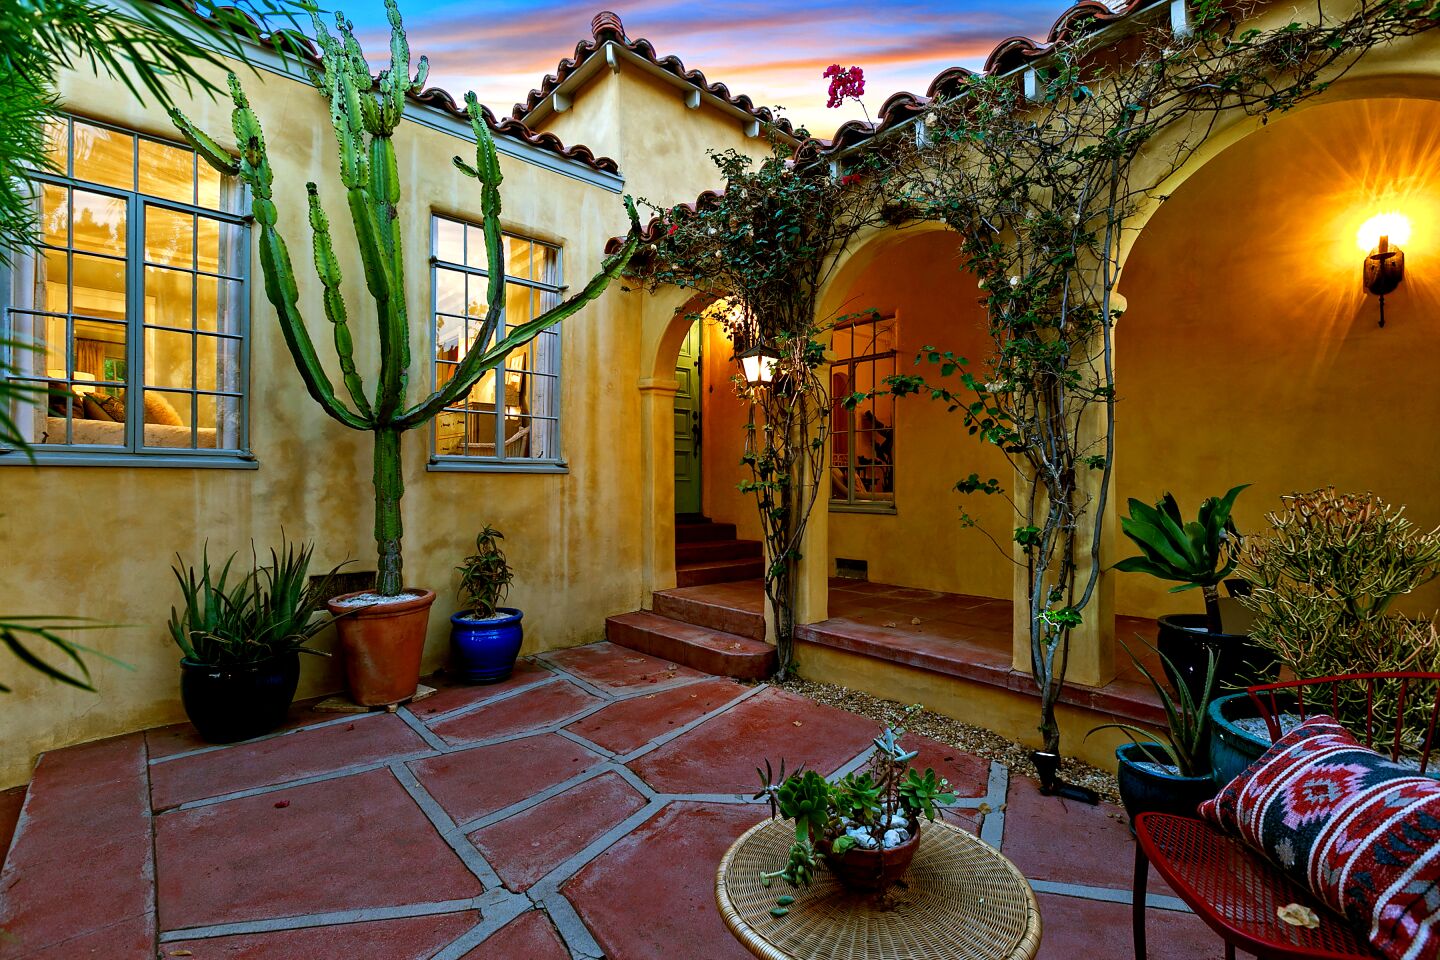 A secluded courtyard sits at the entryway of the house.